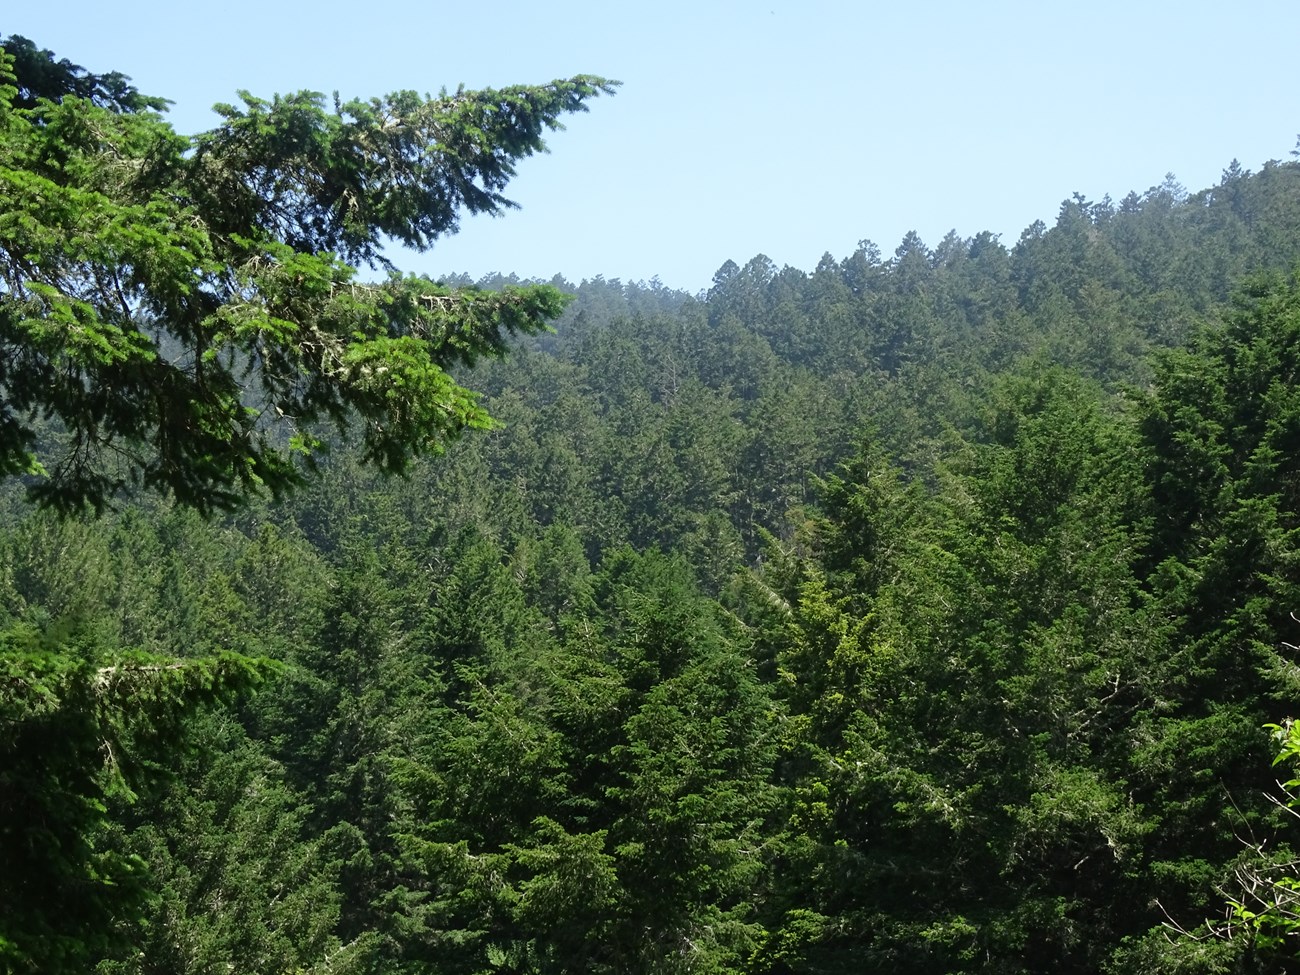 A ridge and valley filled with dark green coniferous trees.